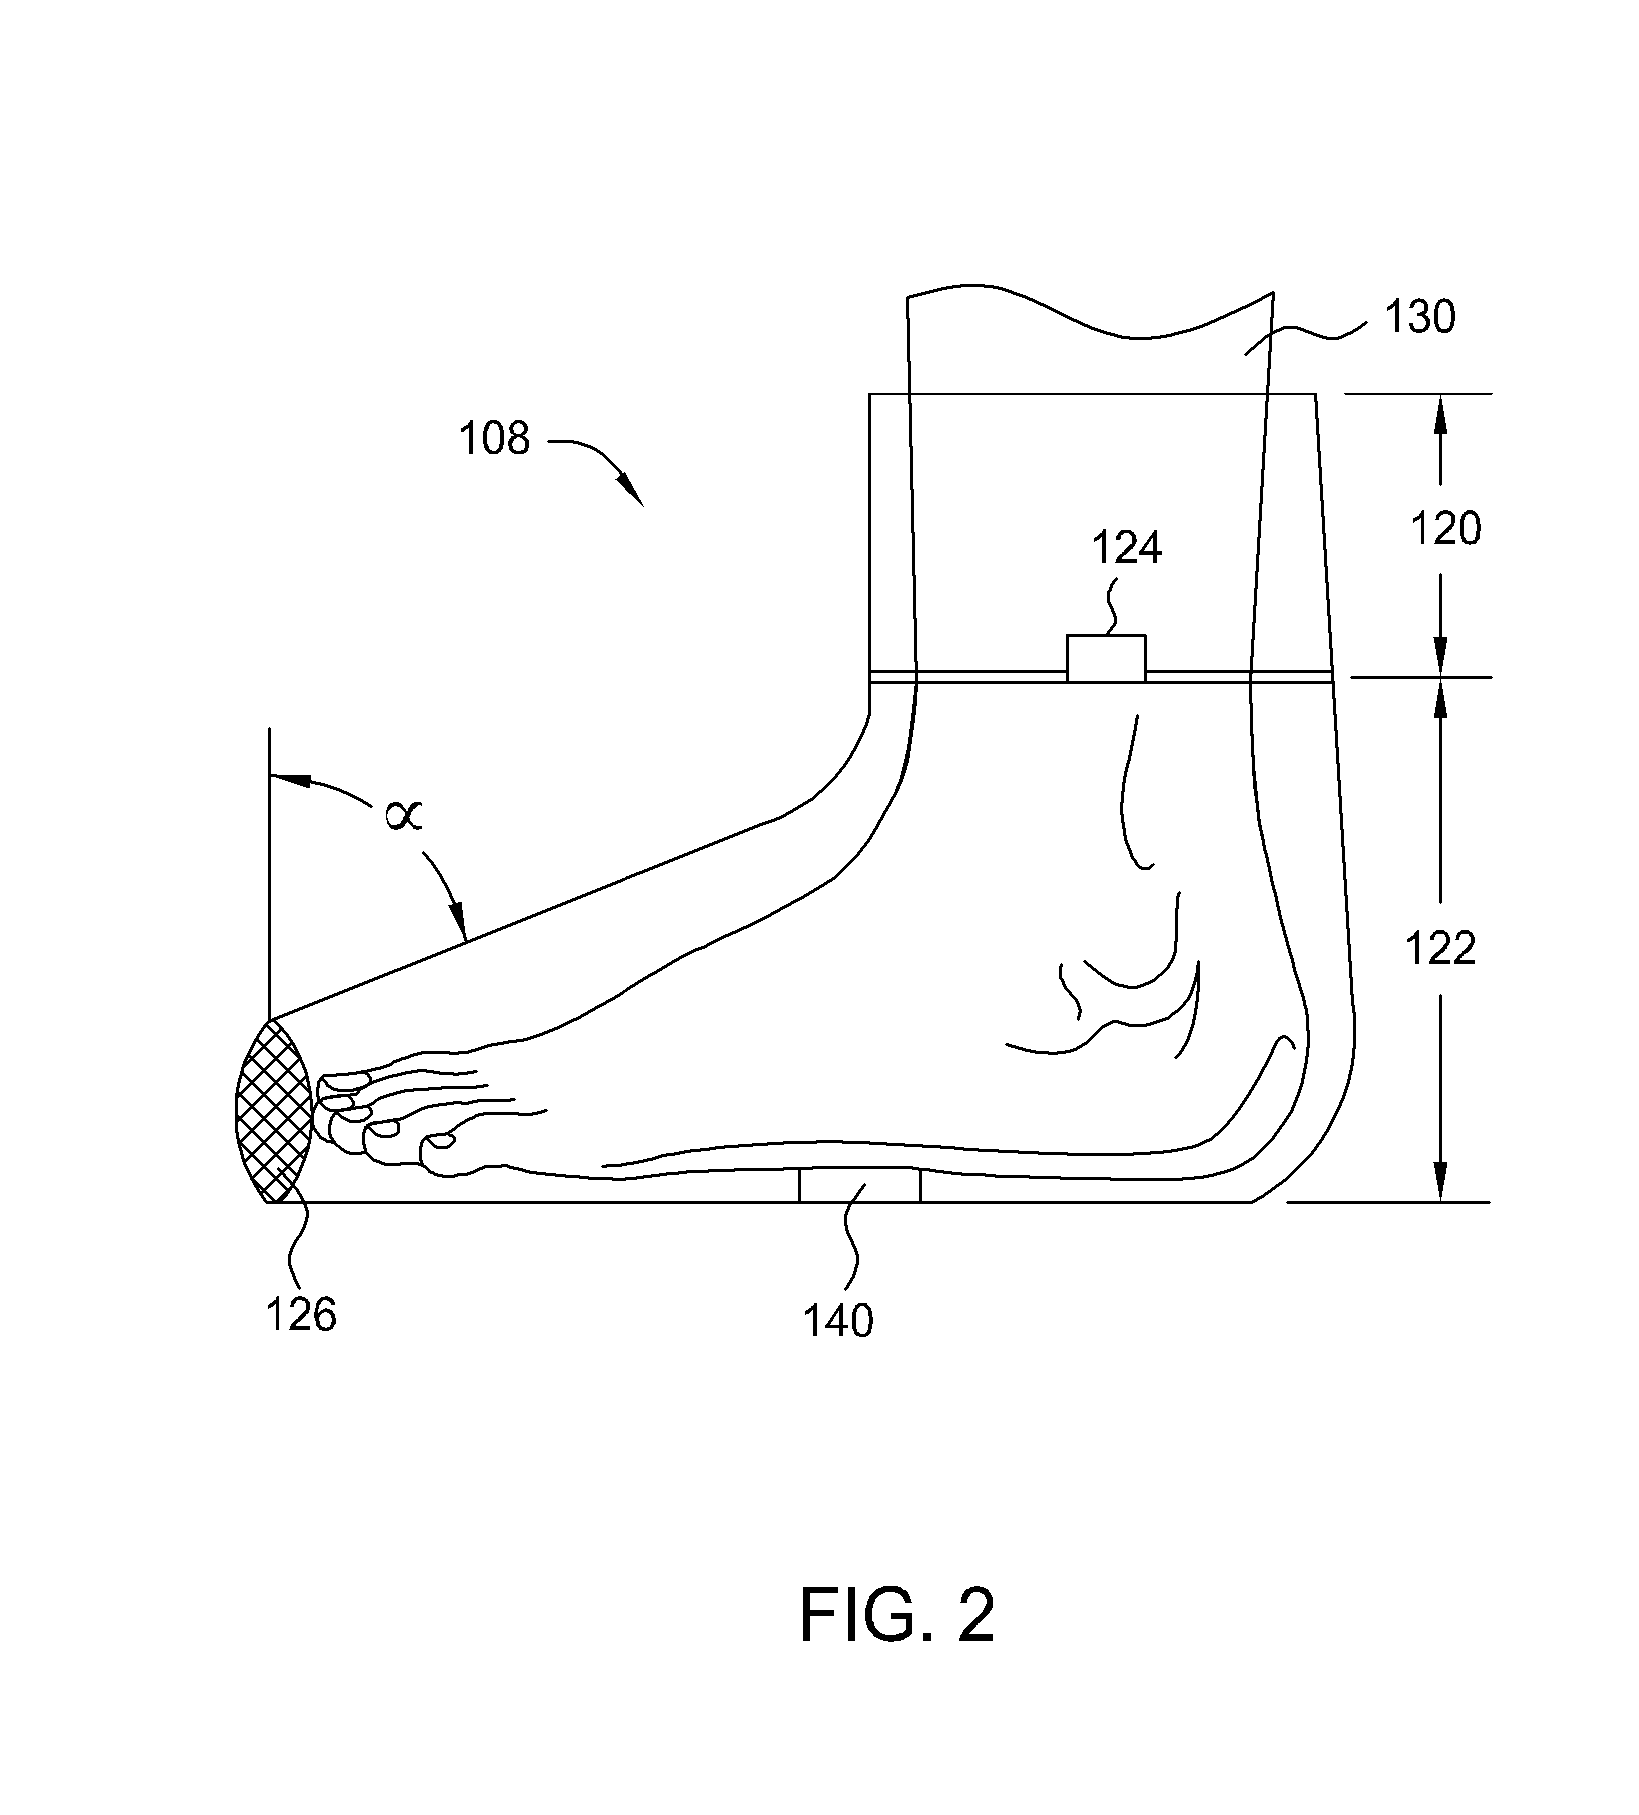 Methods and apparatus for increasing blood circulation